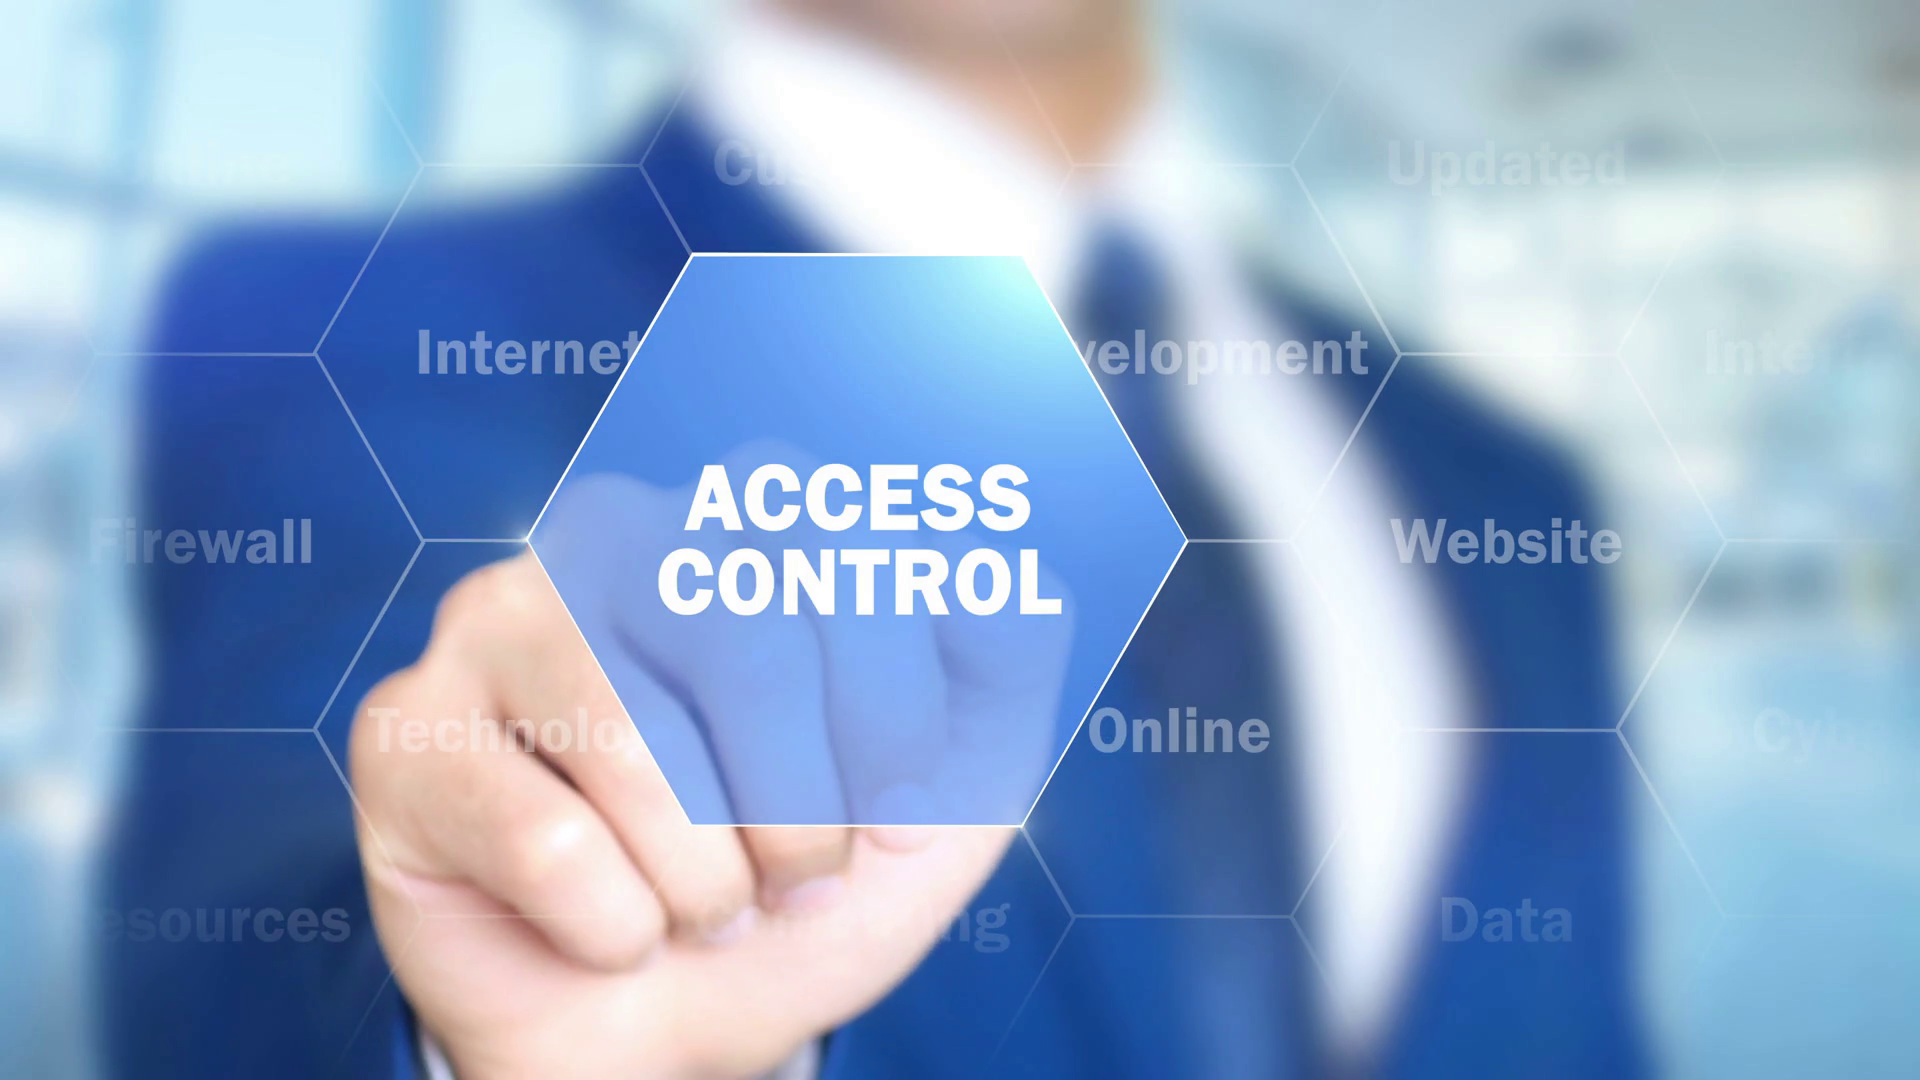 What are the 10 things that you should demand and receive from your access control provider?